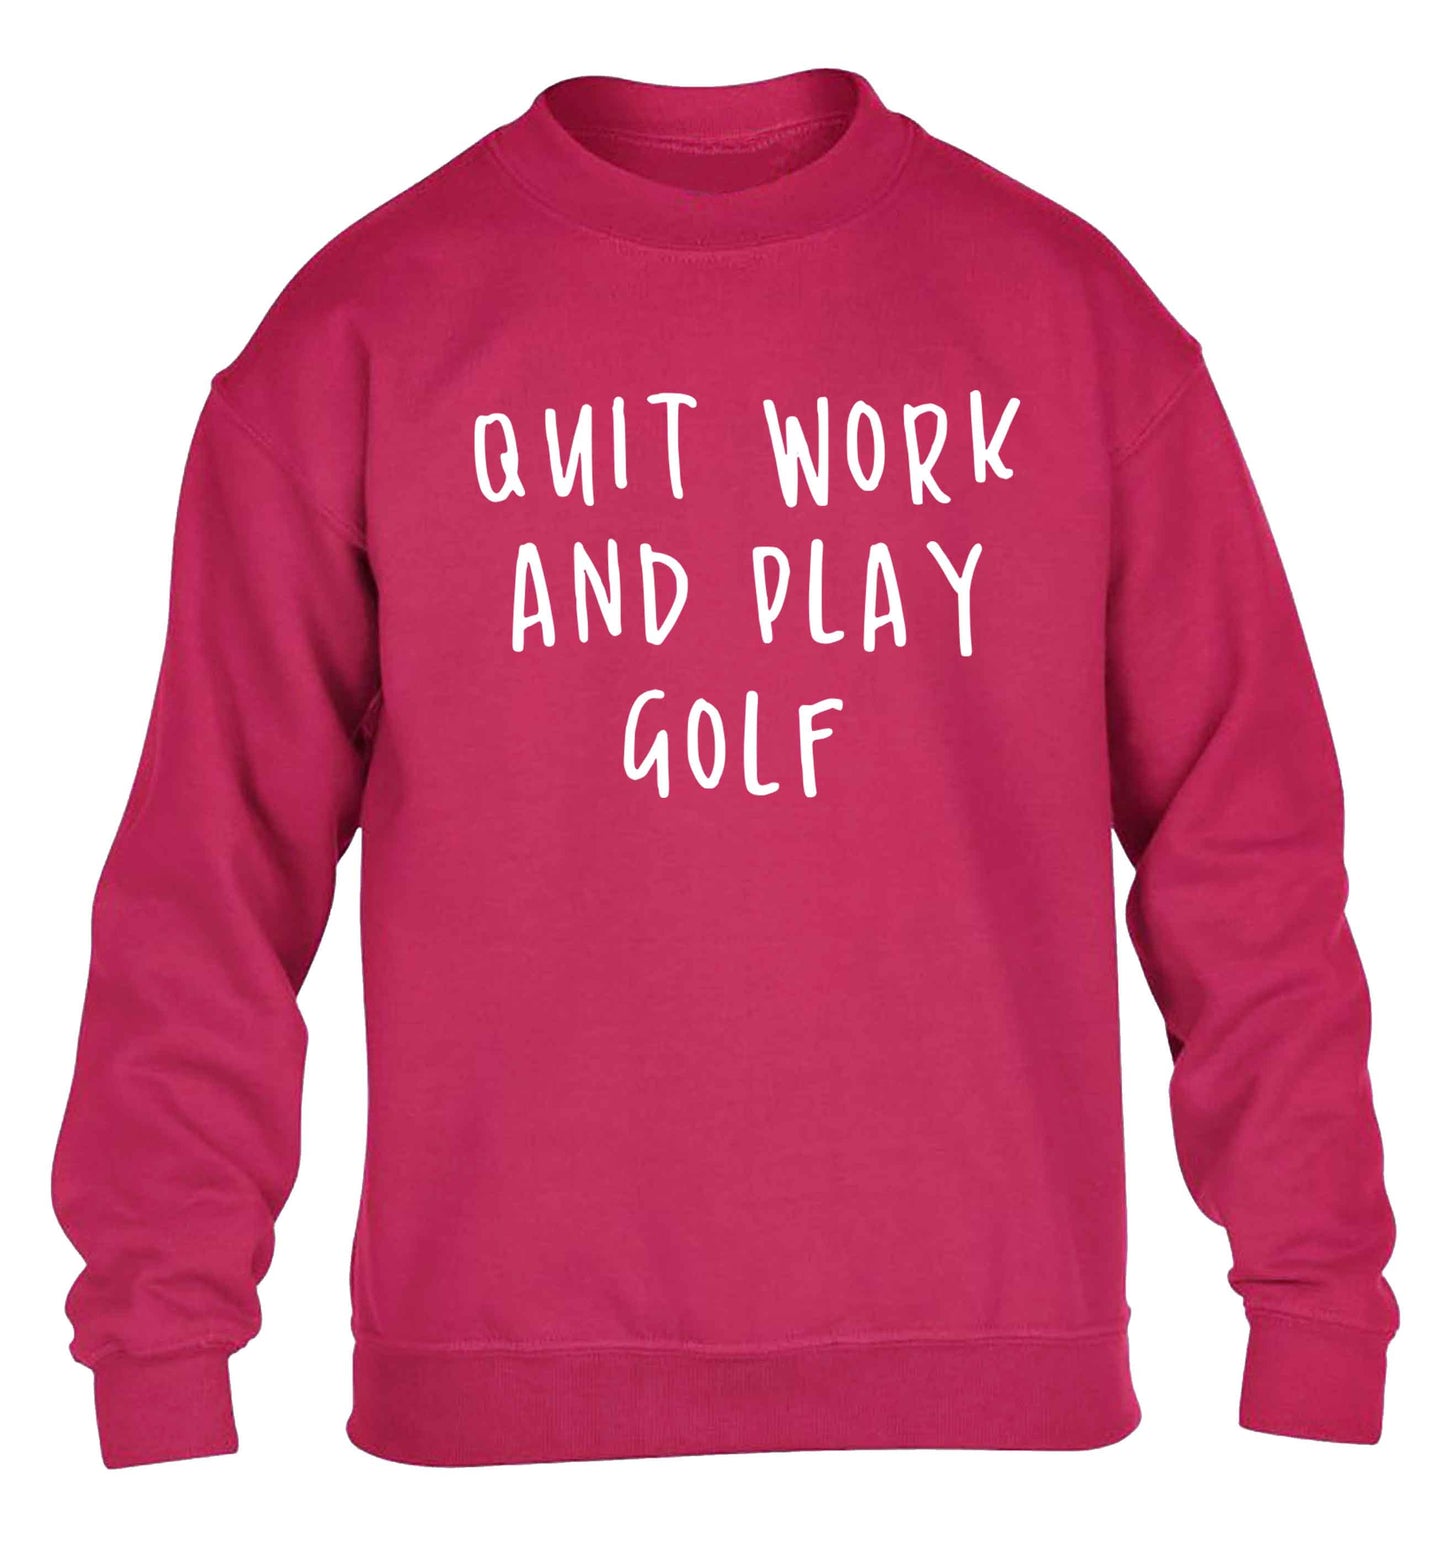 Quit work and play golf children's pink sweater 12-13 Years